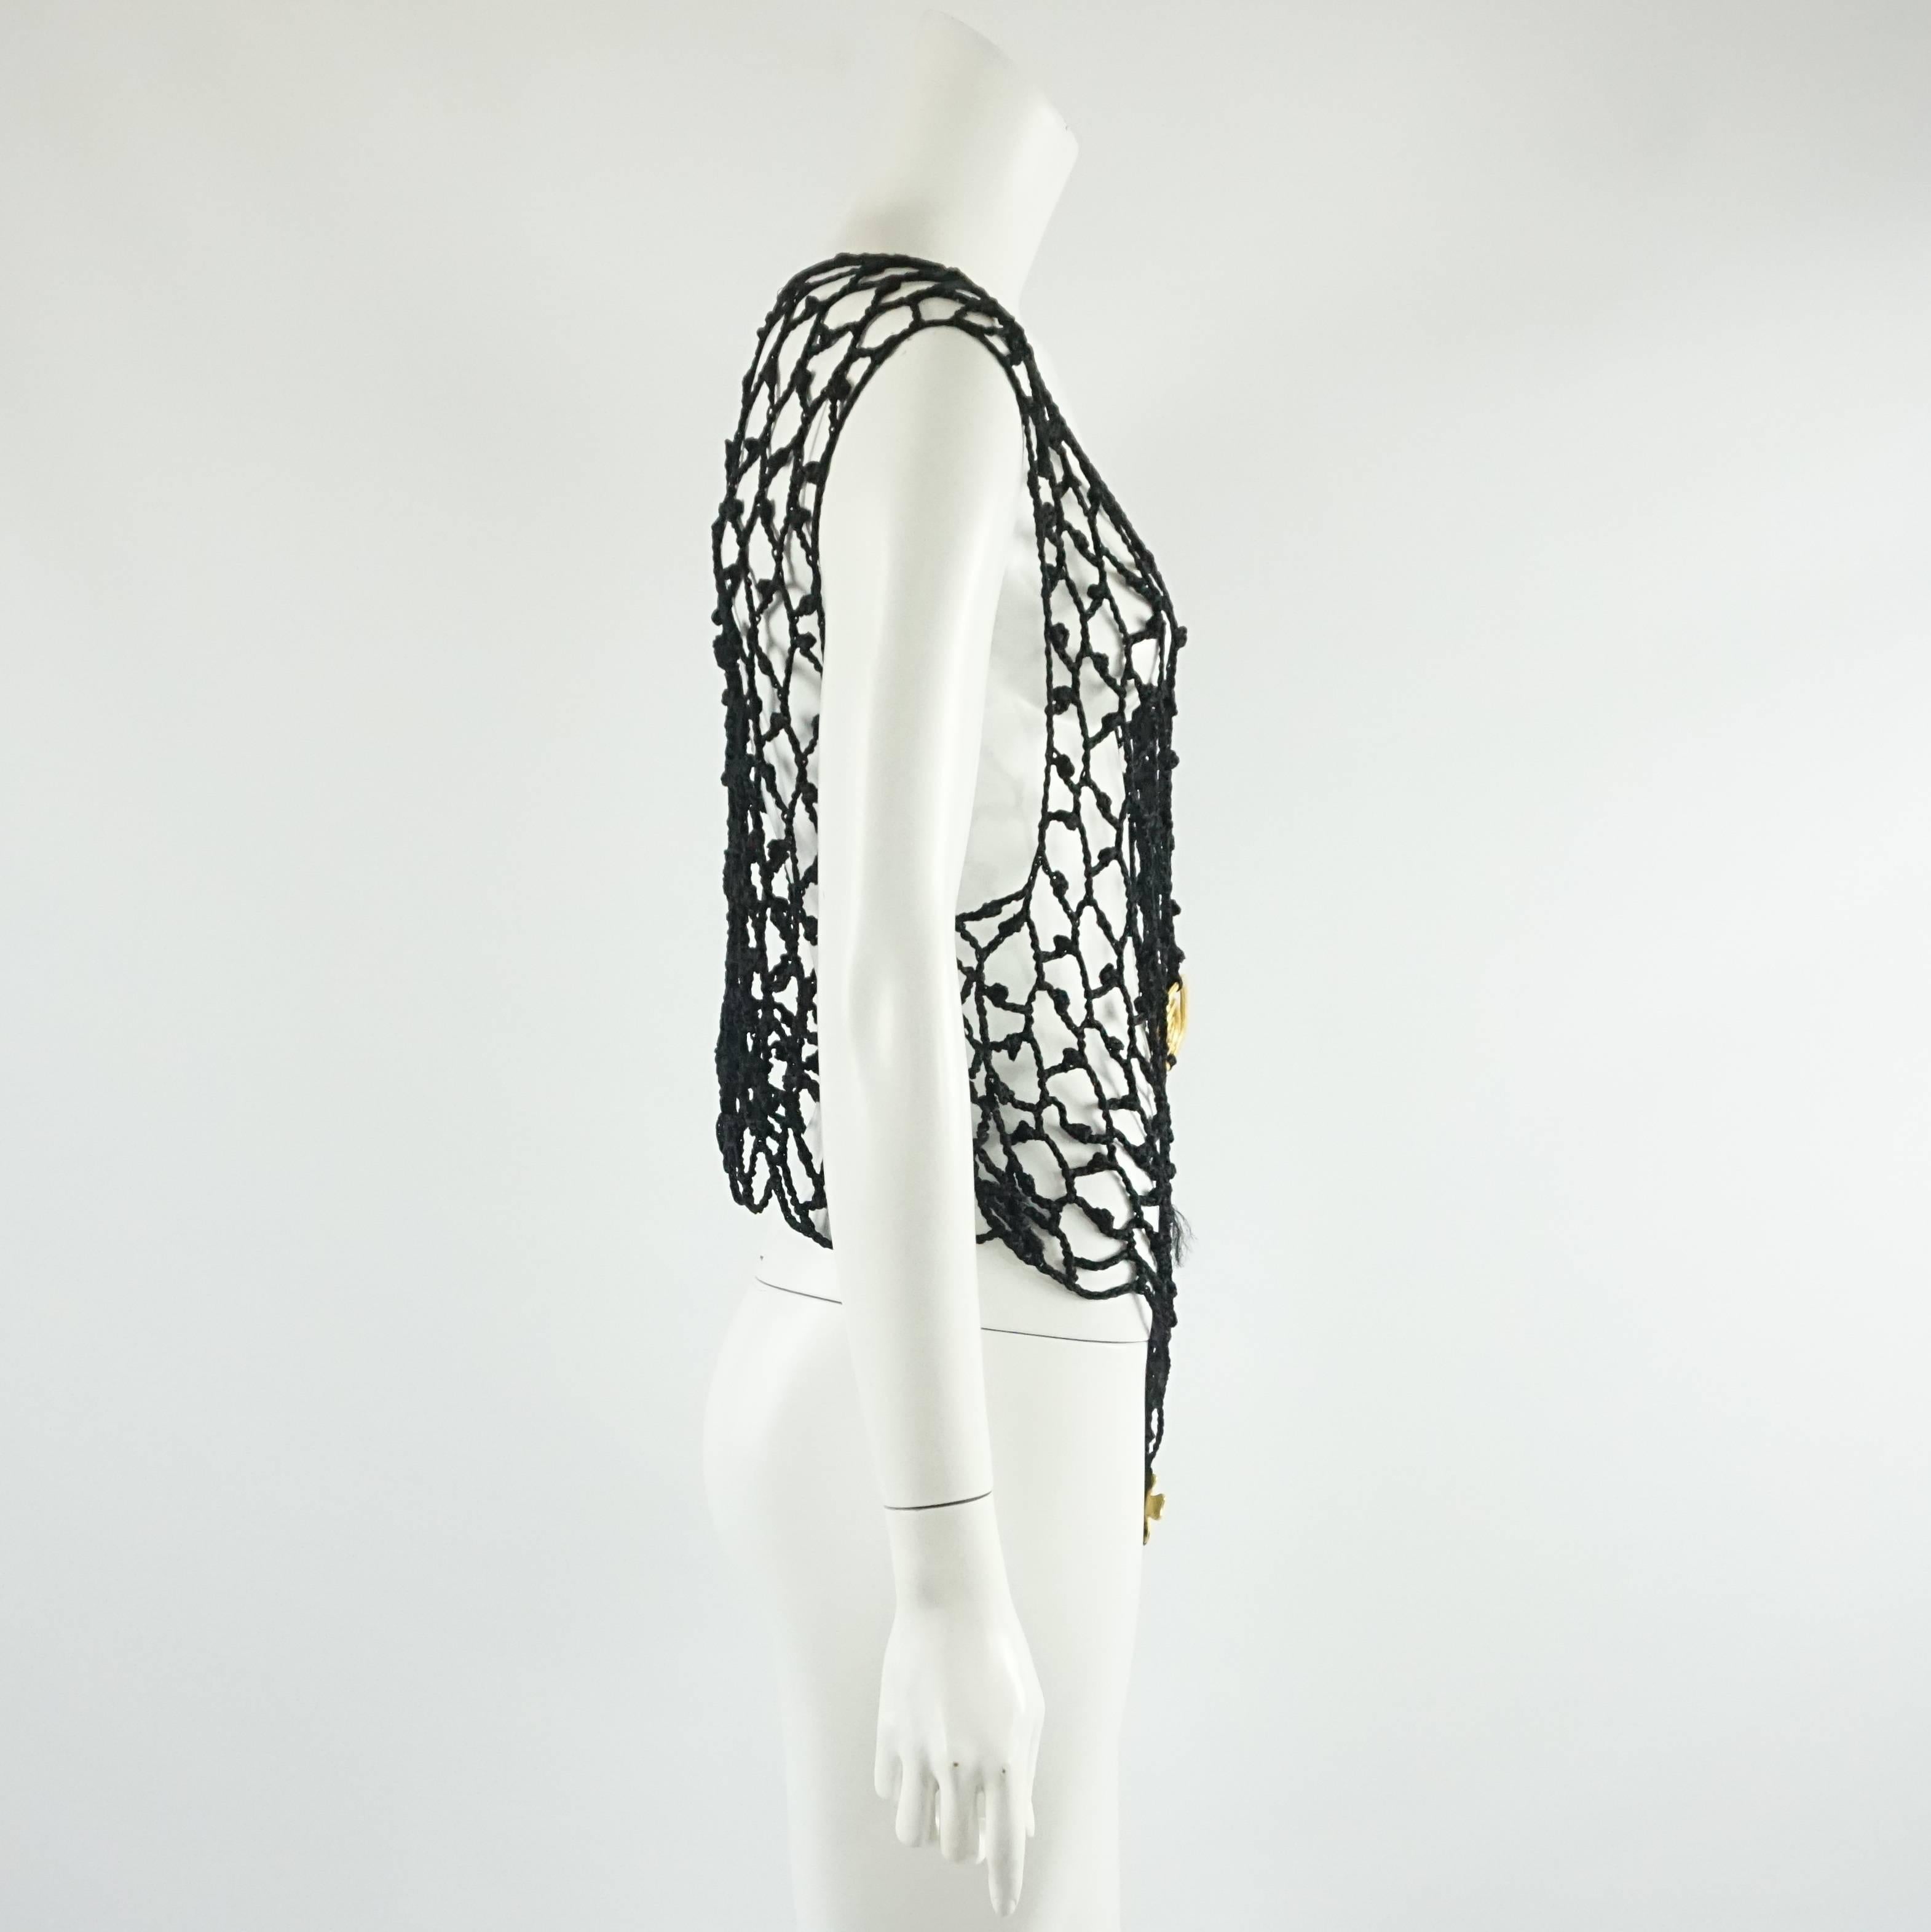 This highly collectible vintage Christian Lacroix black open crochet blouse is loose fitting with 4 large, hammered gold buttons in the front. The blouse hangs asymmetrically with a longer portion in the front and fits various sizes. Size M, circa